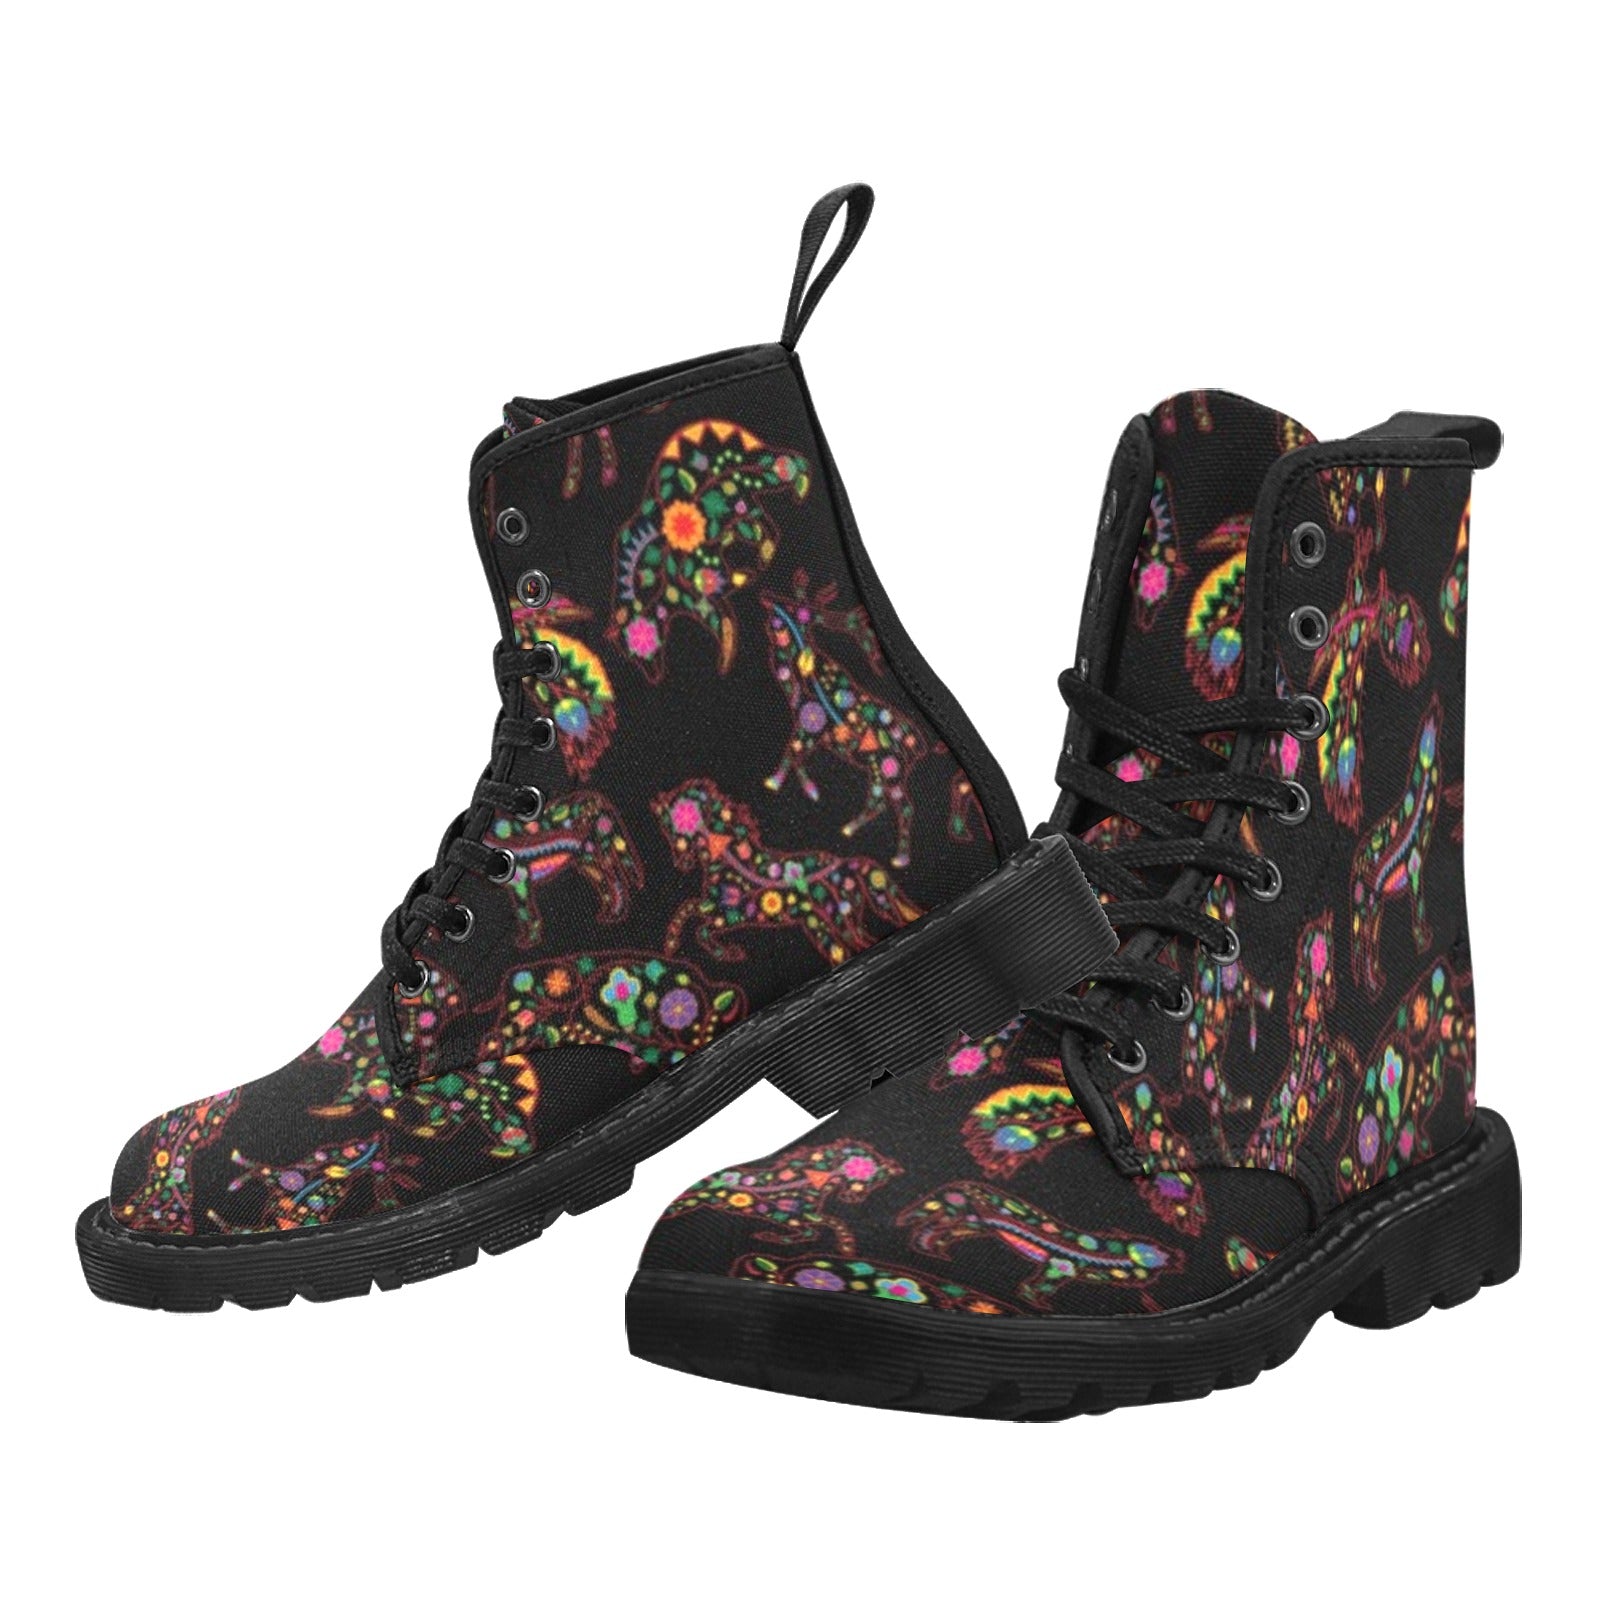 Neon Floral Animals Boots for Women (Black)